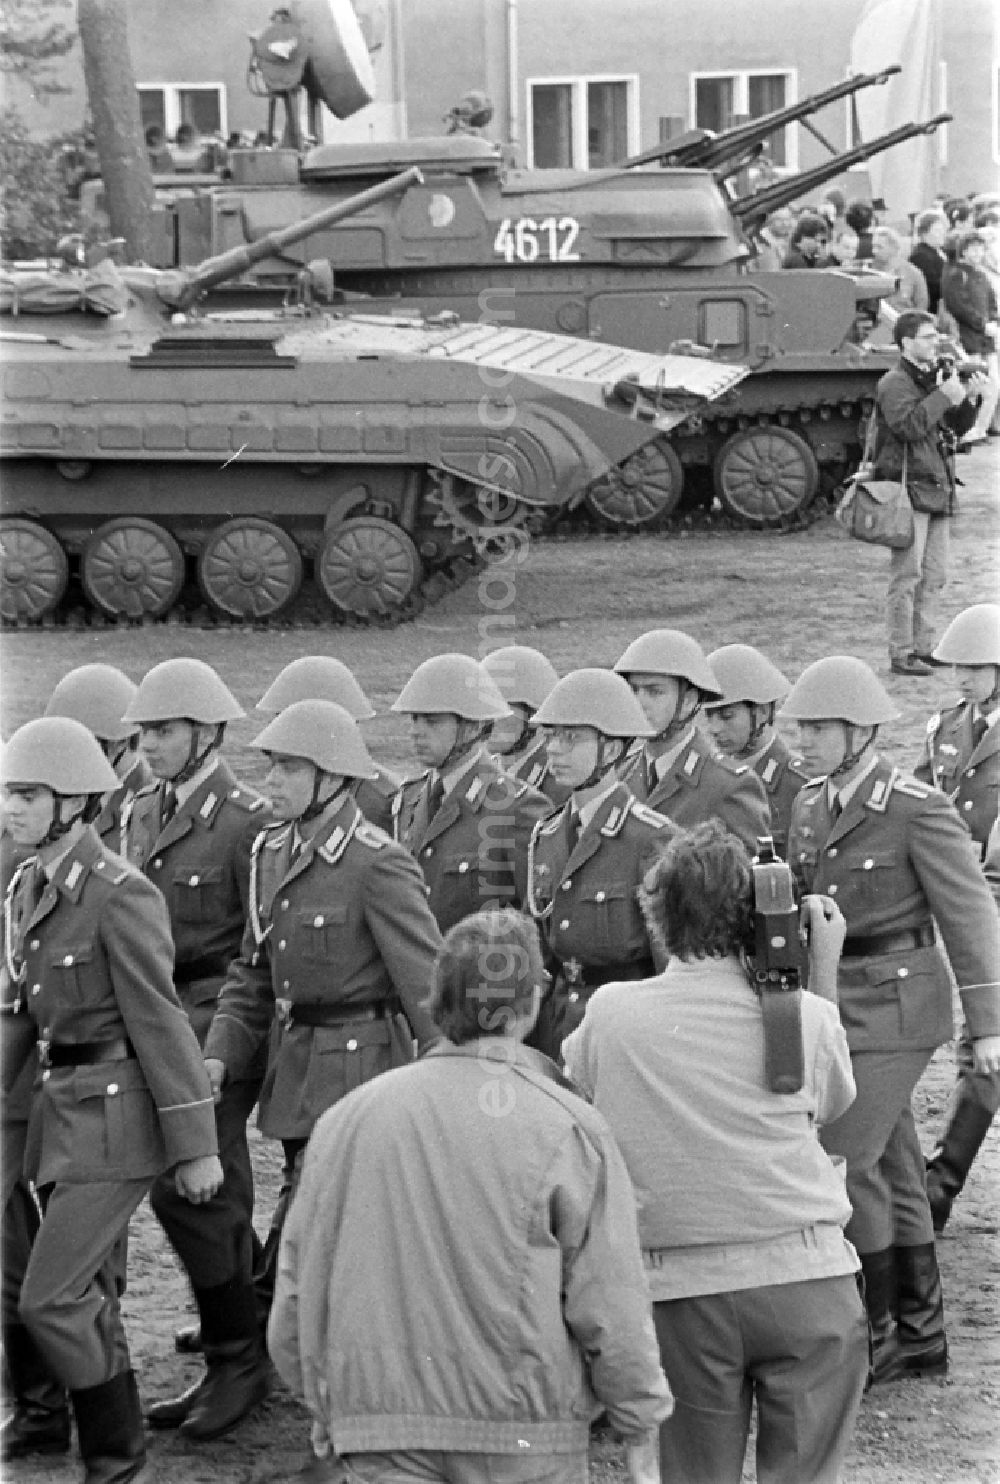 GDR image archive: Goldberg - Parade formation and march of soldiers and officers of Panzer Regiment 8 (PR-8) on the occasion of the ceremonial and media-effective dissolution of the troop unit on the grounds of the Artur-Becker barracks in Goldberg in the state of Mecklenburg-Western Pomerania in the area of the former GDR, German Democratic Republic